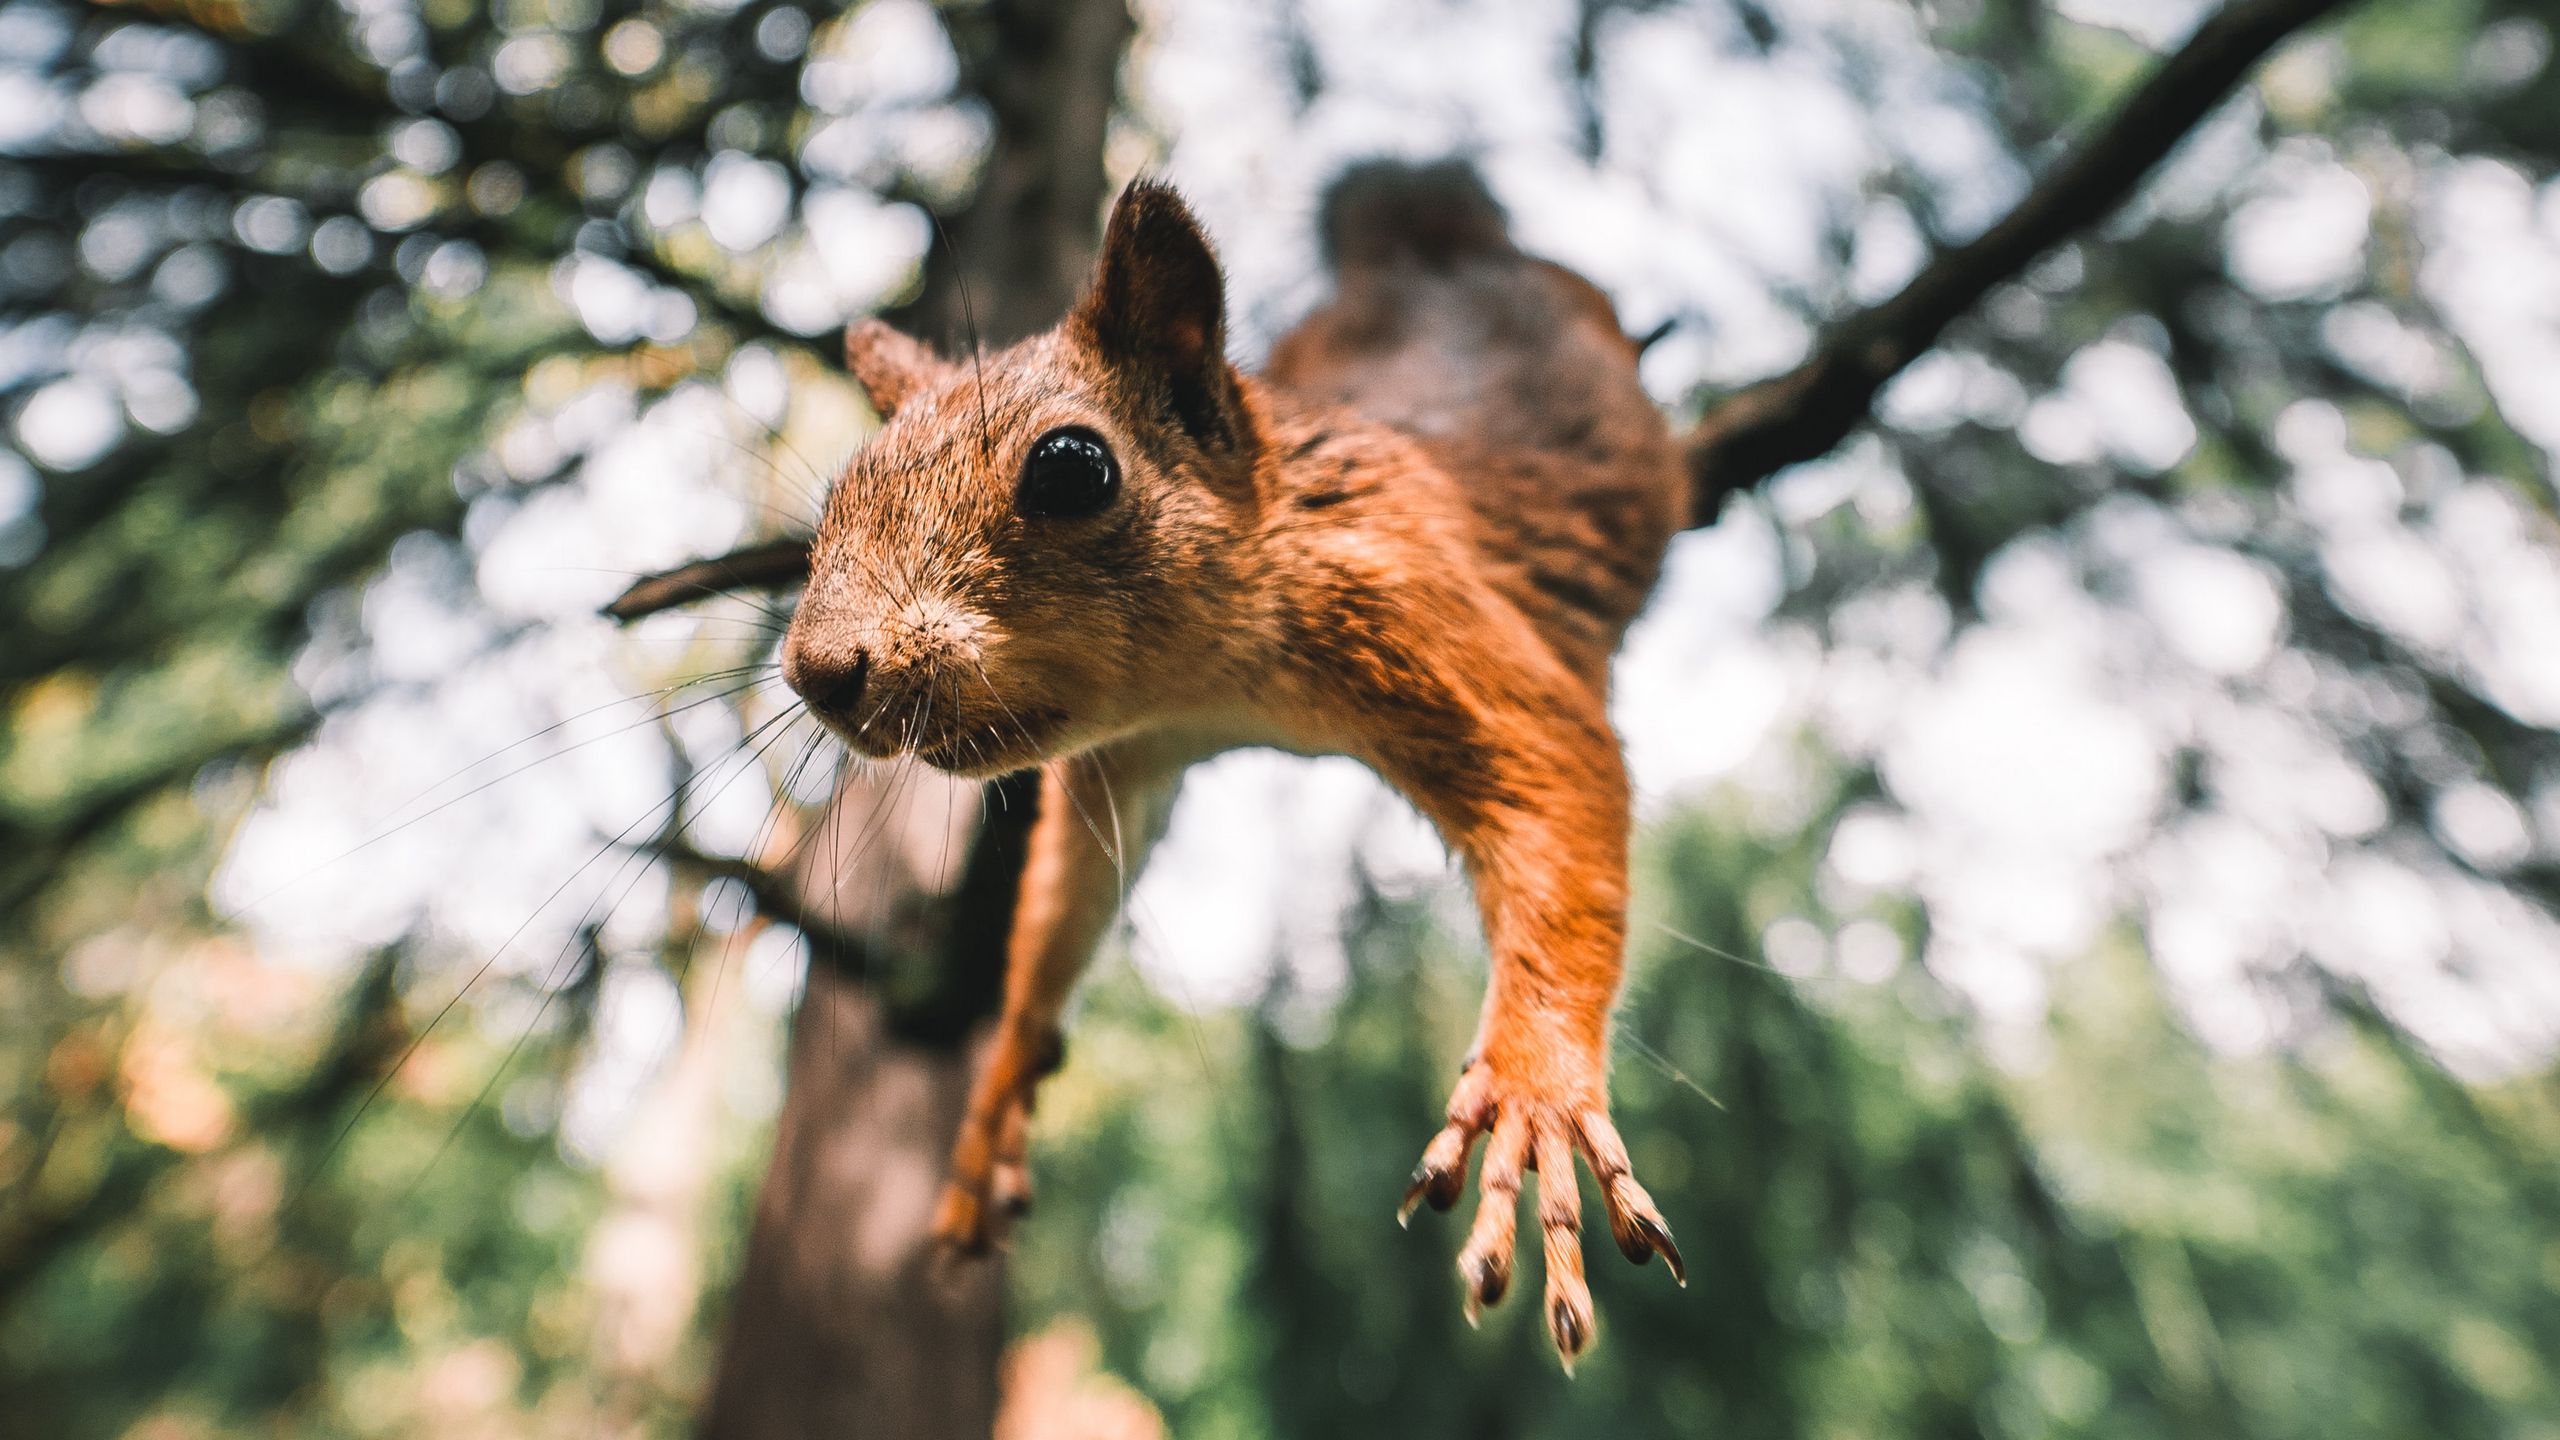 Download wallpaper 2560x1440 squirrel, rodent, funny, paws, jump widescreen  16:9 hd background